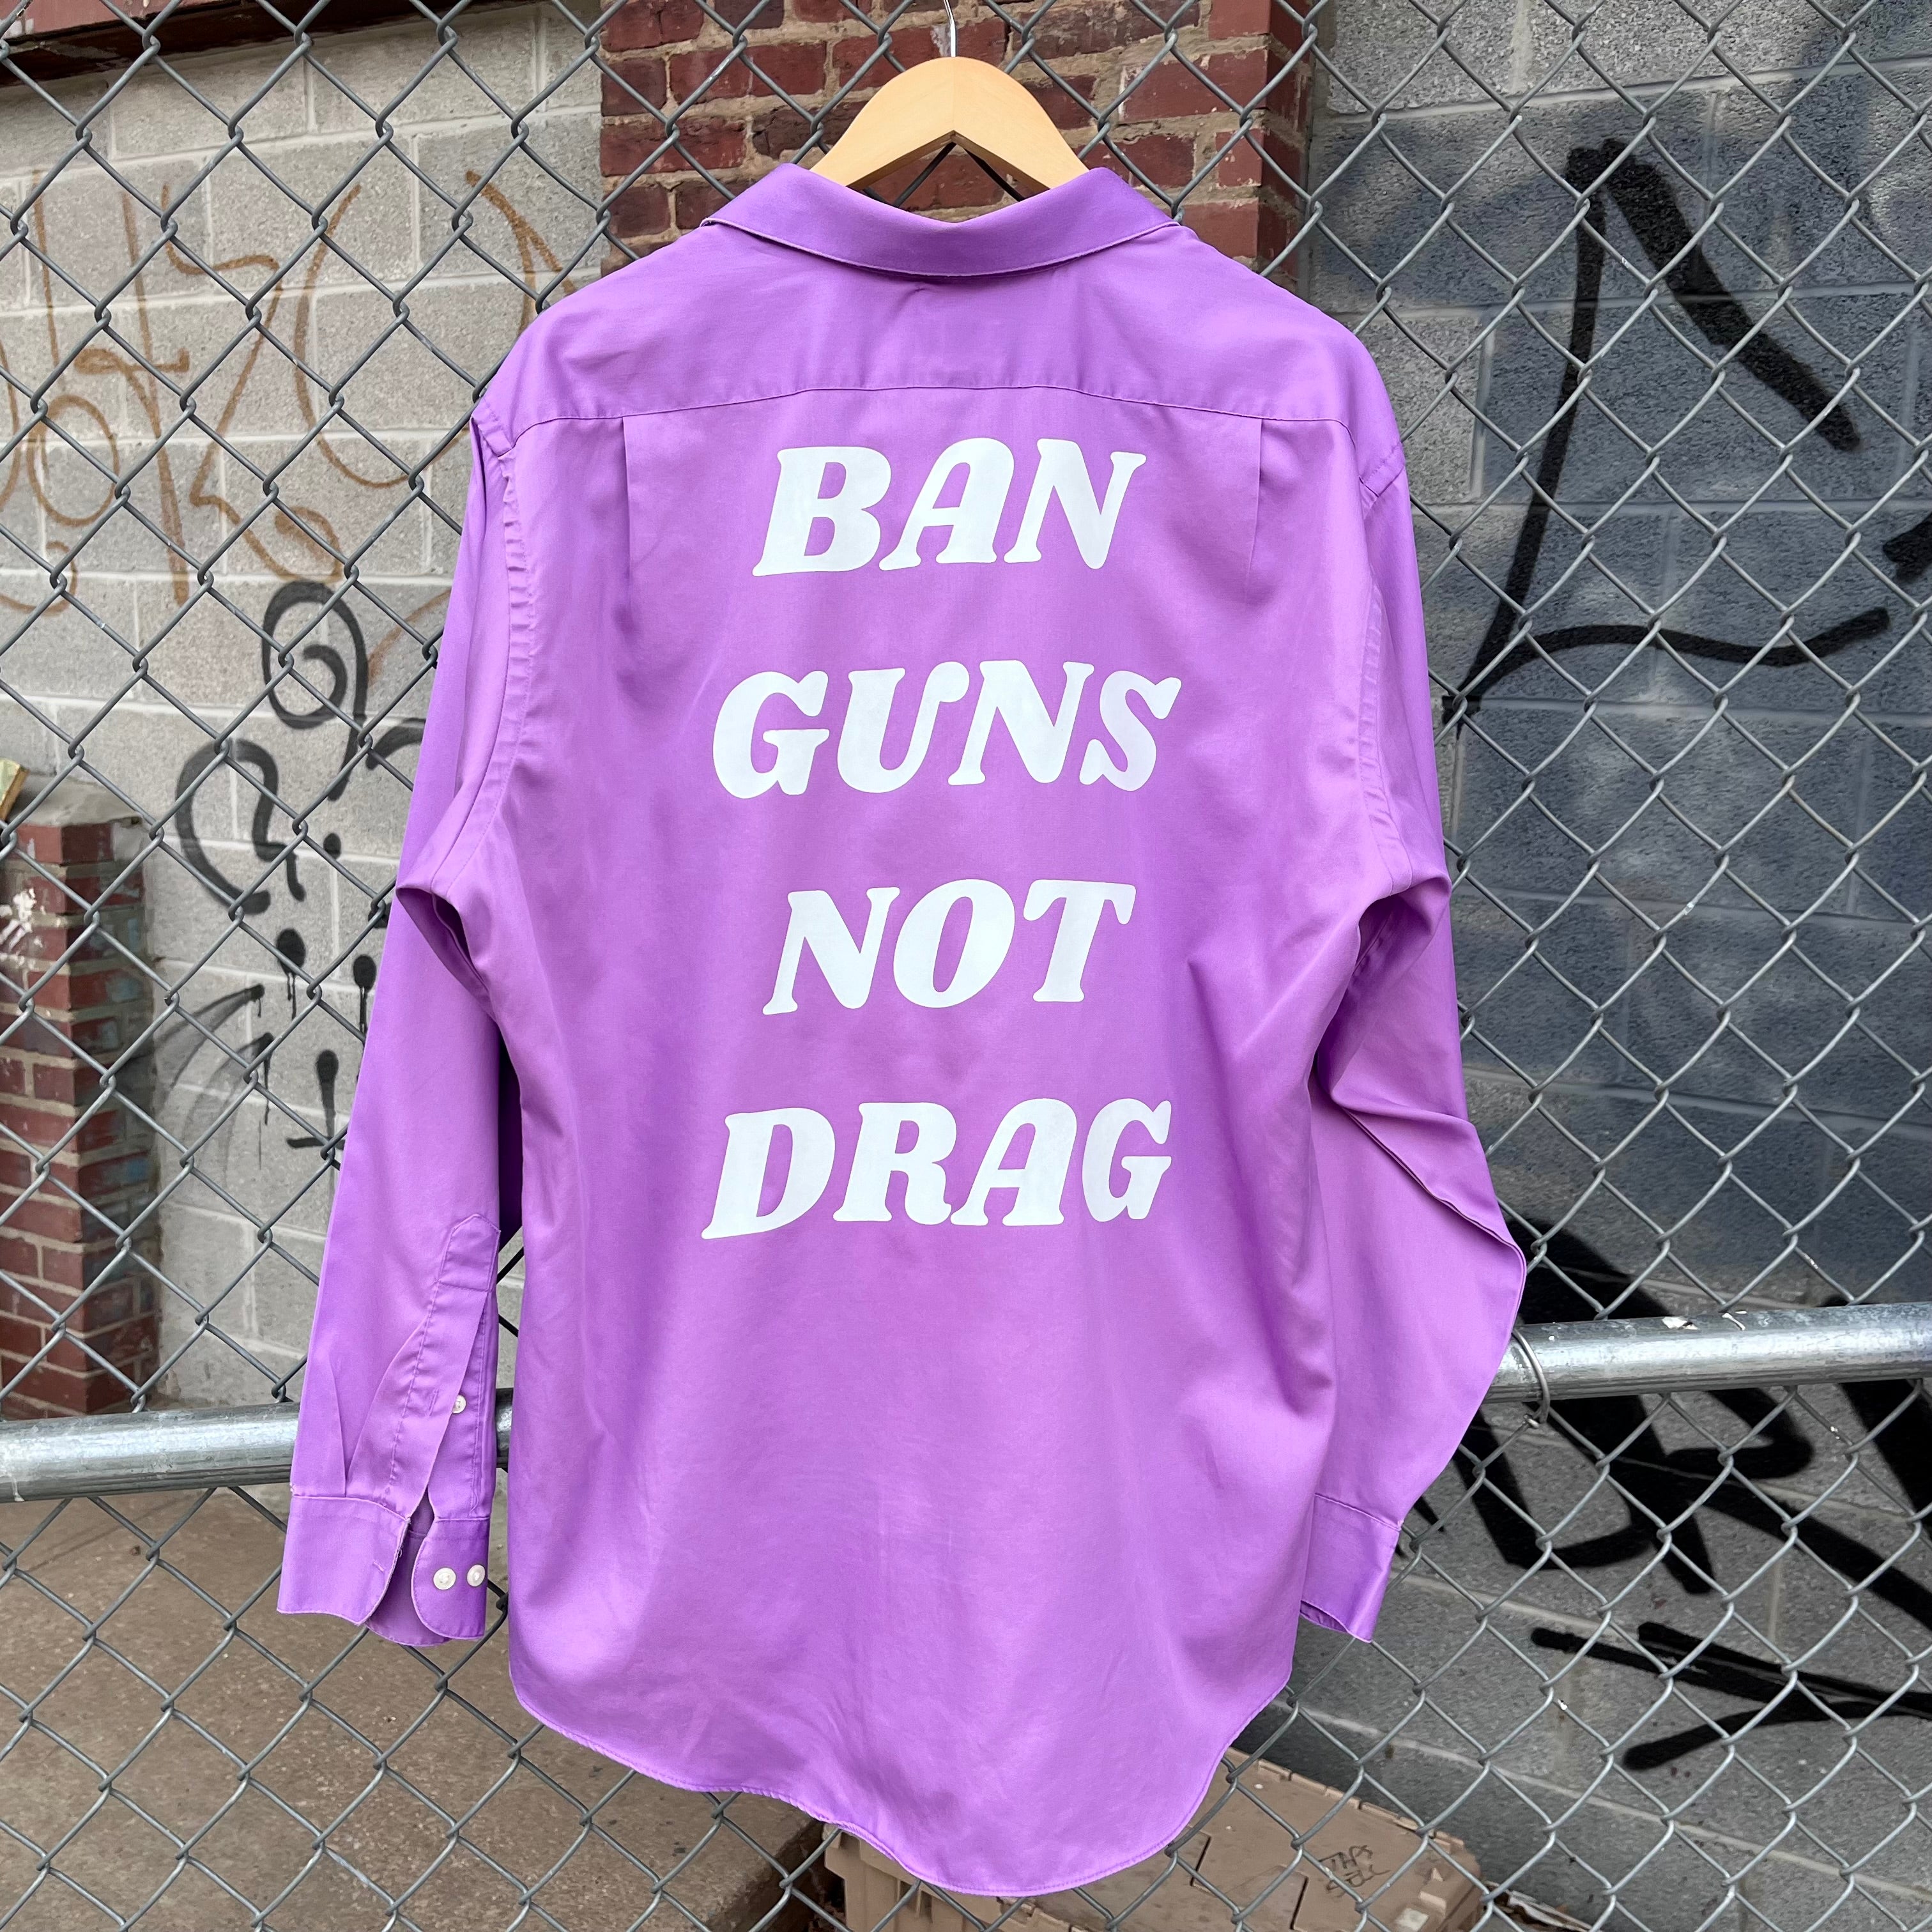 Cool Tones Ban Guns Not Drag Upcycled Button Down